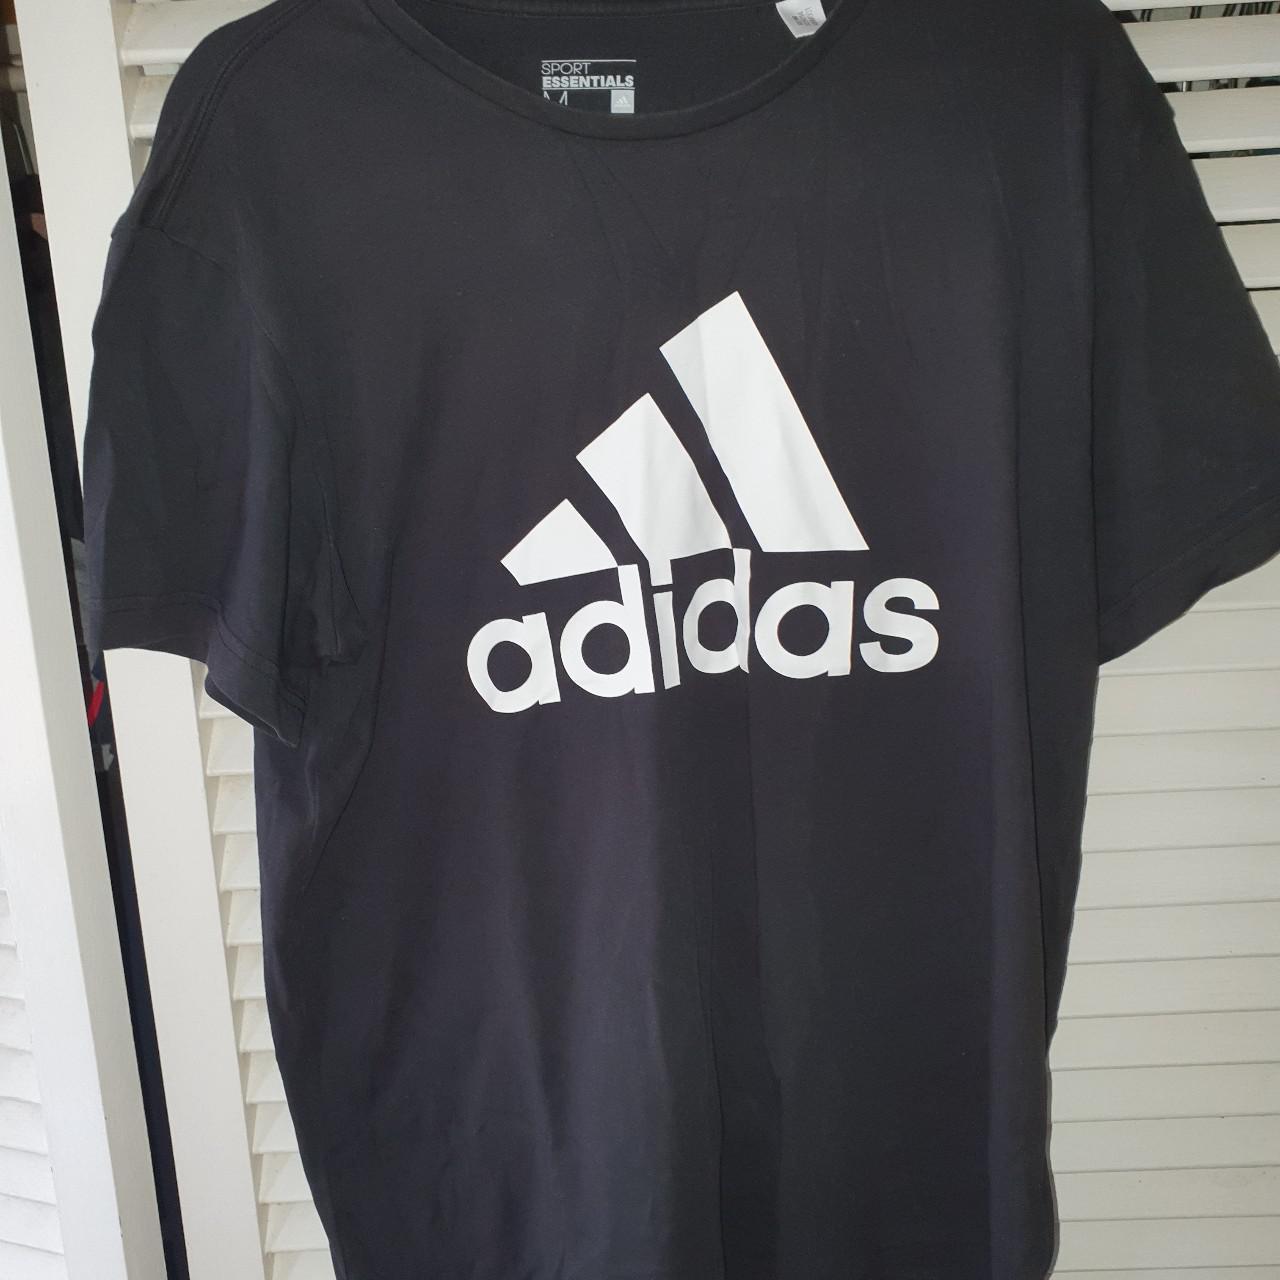 Product Image 1 - Adidas t-shirt.
Sports essentials
Black with White